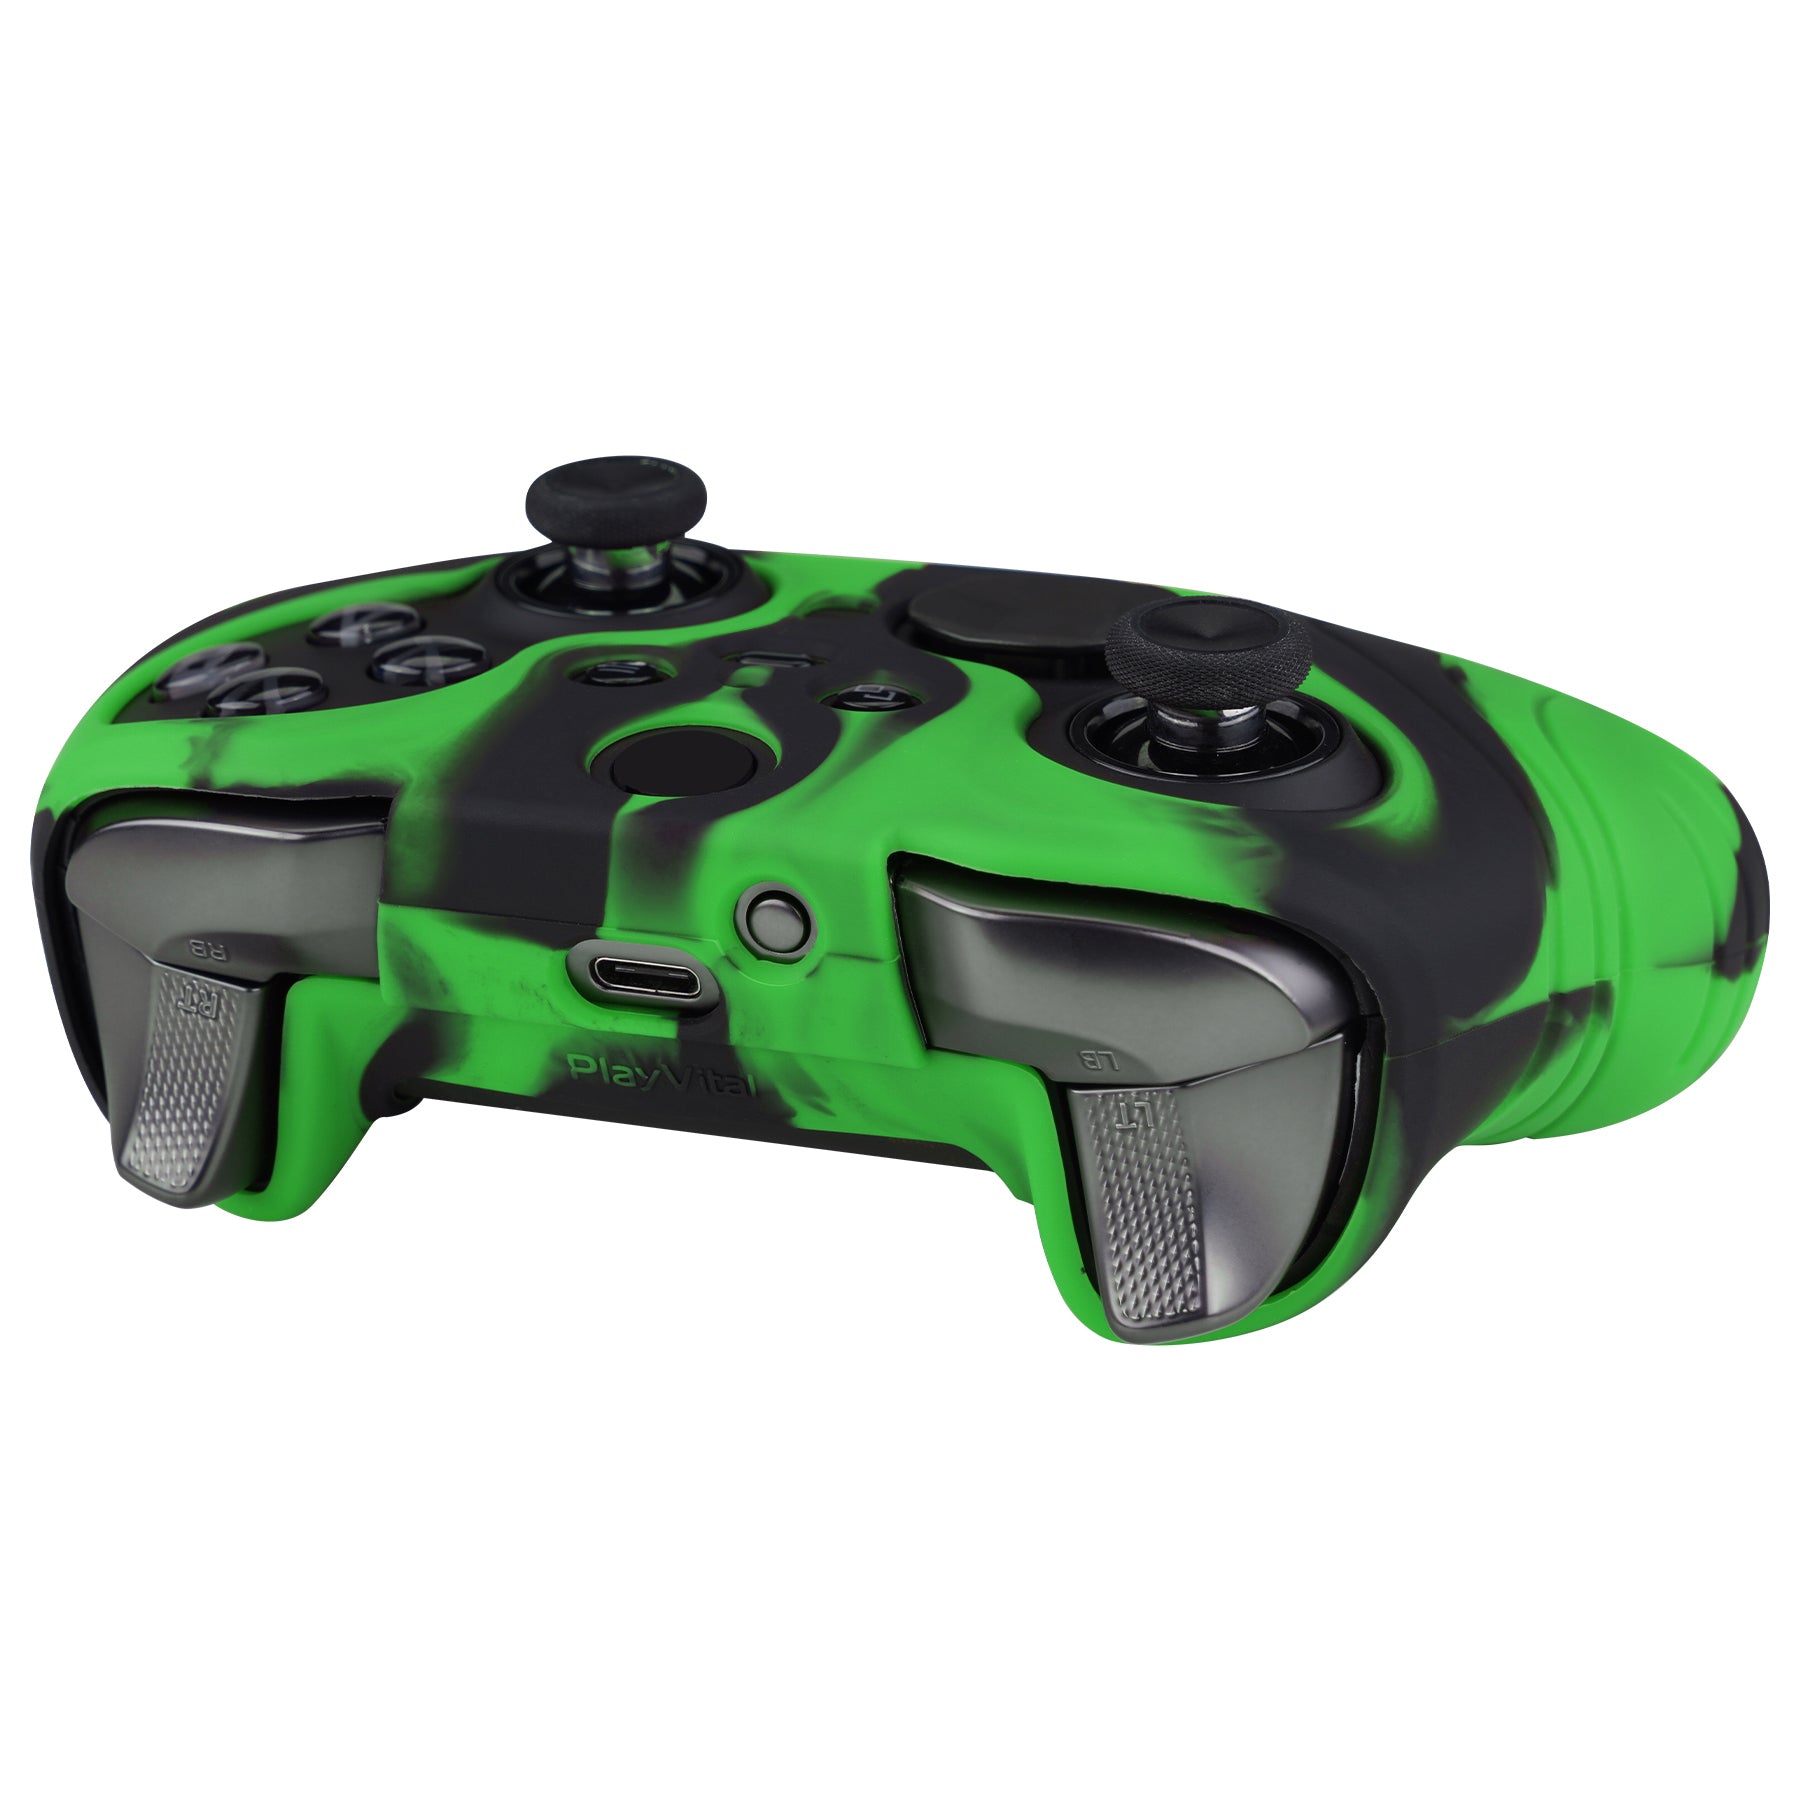 PlayVital Samurai Edition Anti Slip Silicone Case Cover for Xbox Elite Wireless Controller Series 2, Ergonomic Soft Rubber Skin Protector for Xbox Elite Series 2 with Thumb Grip Caps - Green & Black- XBE2M005 playvital